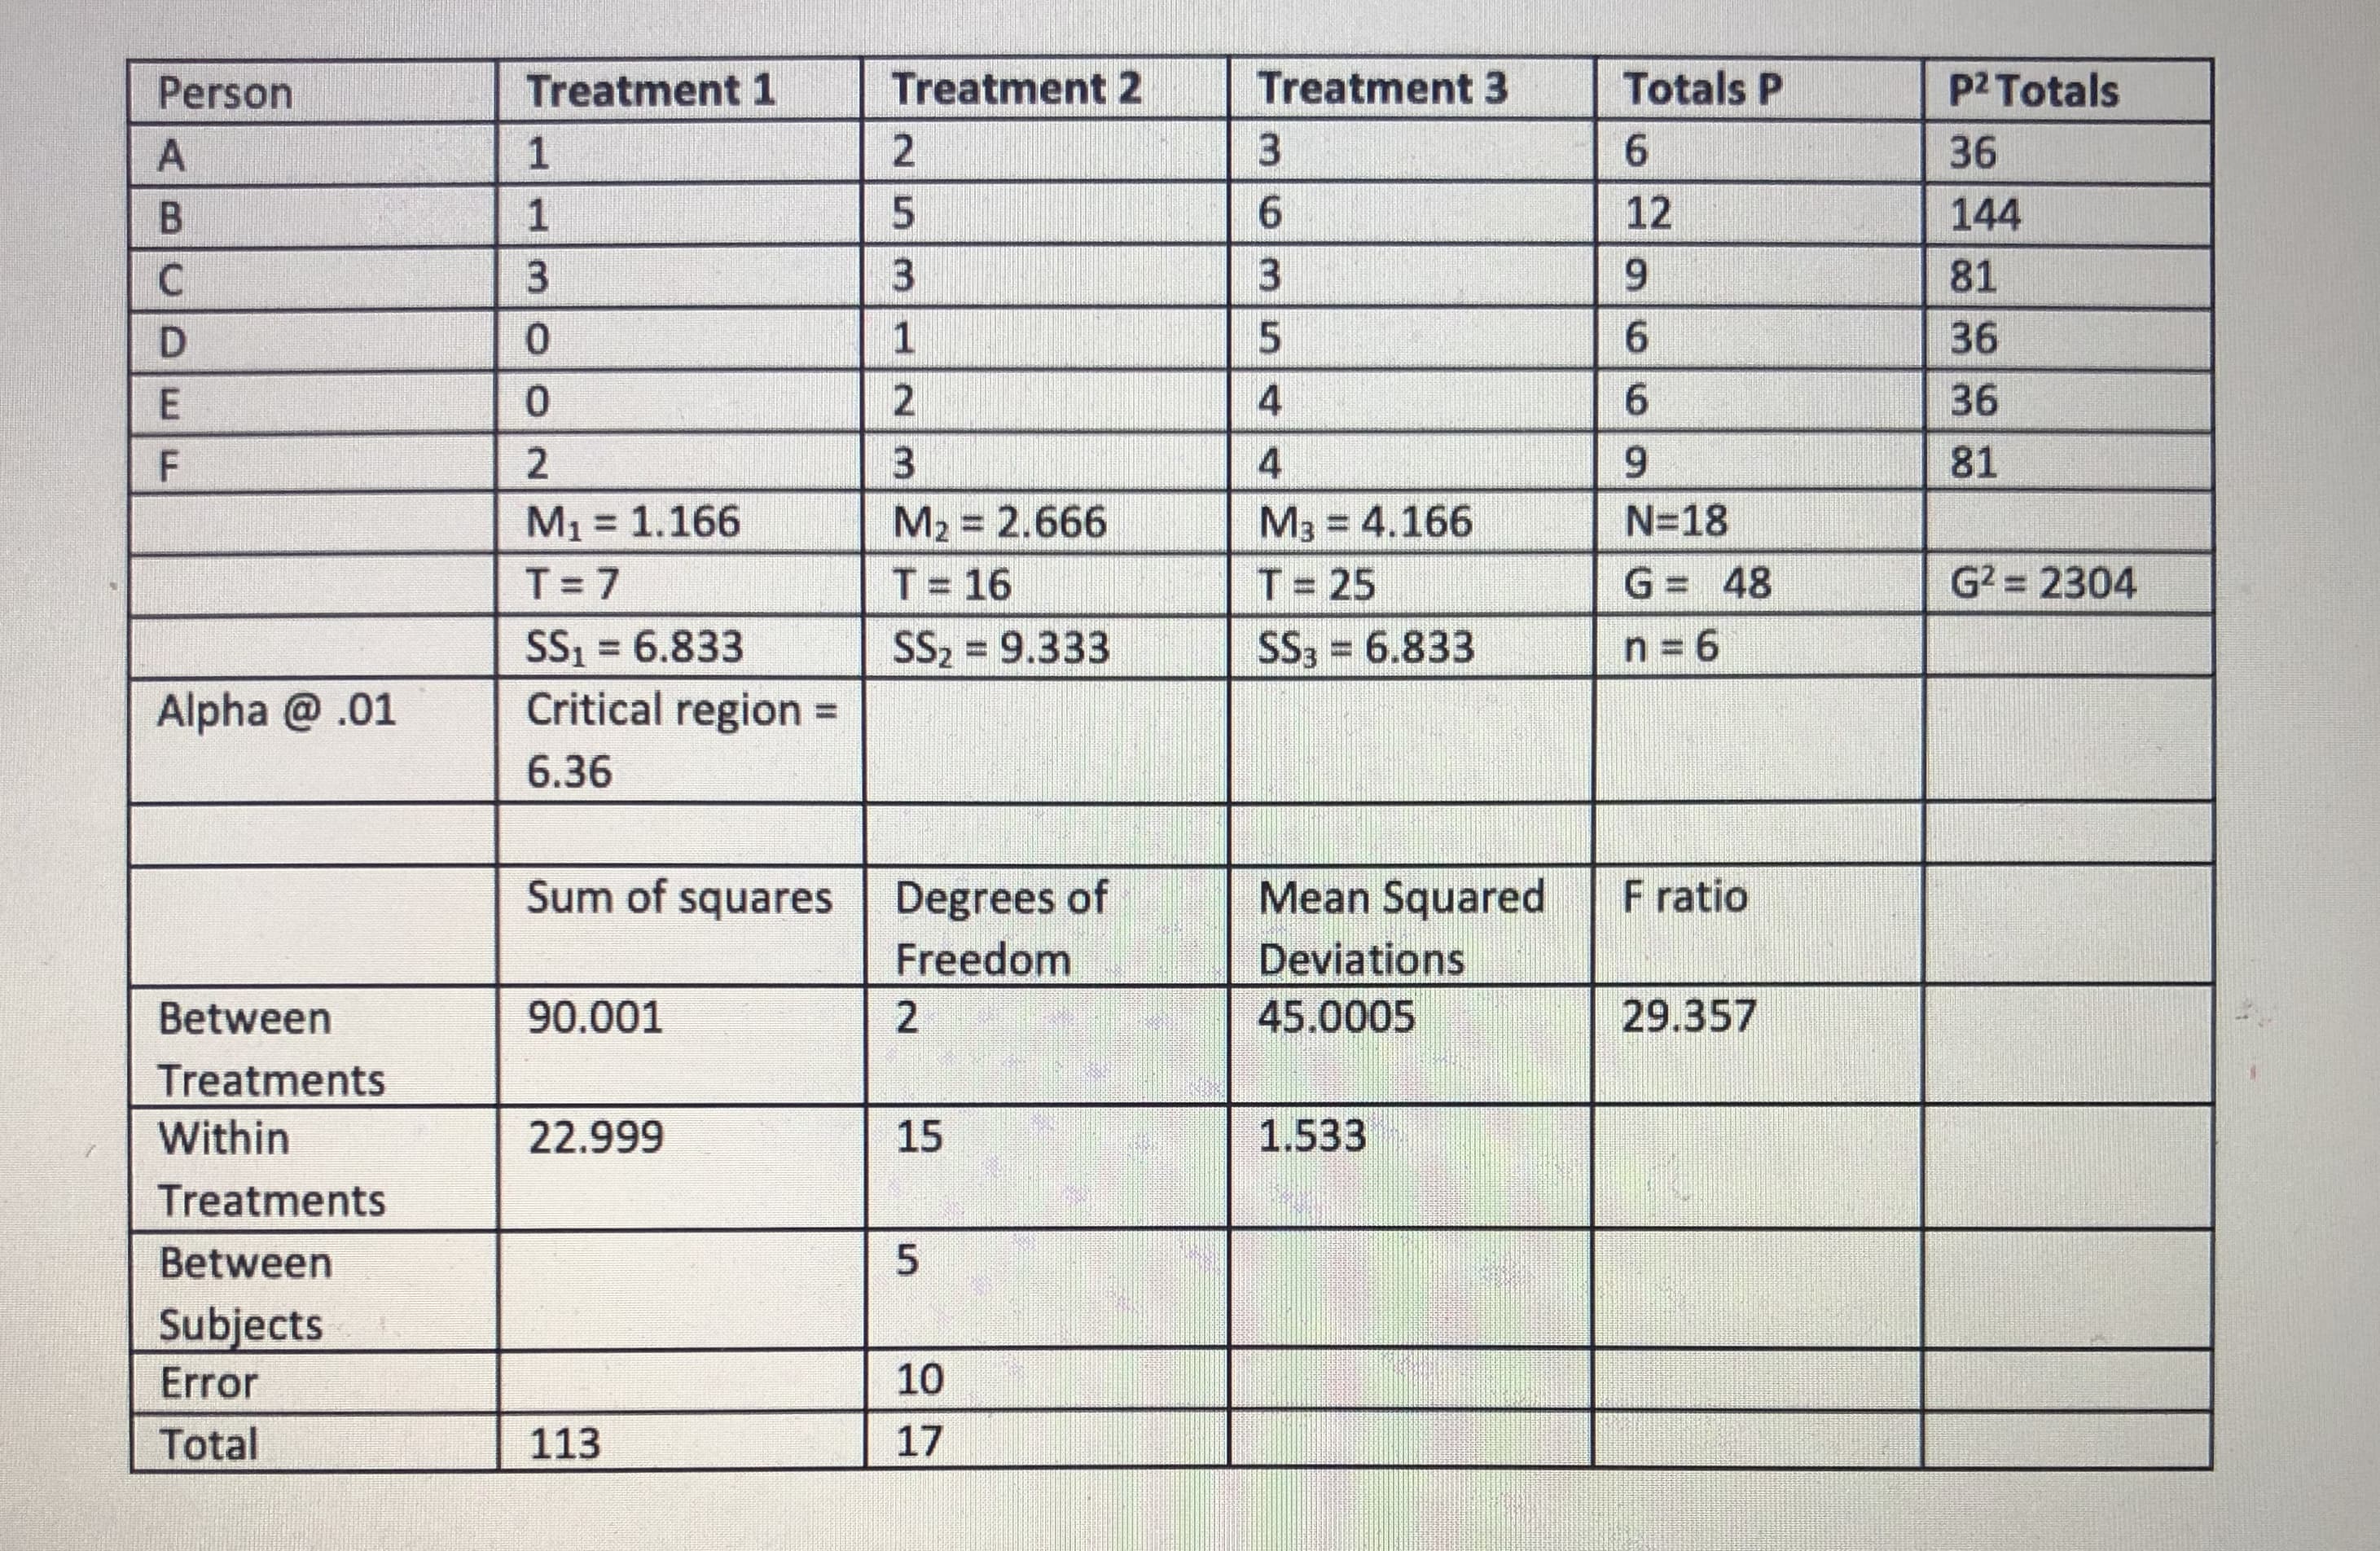 Person
Treatment 1
Treatment 2
Treatment 3
Totals P
p2 Totals
6.
36
12
144
3
9.
81
36
9.
36
4
6.
81
M1 = 1.166
M2 = 2.666
M3 = 4.166
N=18
%3D
%3D
T= 7
T= 16
T= 25
G = 48
G2 = 2304
SS3 = 6.833
Critical region =
SS2 = 9.333
SS3 = 6.833
n = 6
%3D
Alpha @.01
%3D
6.36
Sum of squares
Degrees of
Mean Squared
F ratio
Freedom
Deviations
Between
90.001
45.0005
29.357
Treatments
Within
22.999
15
1.533
Treatments
Between
5.
Subjects
Error
10
Total
113
17
363 54
253 23
BCD EF
